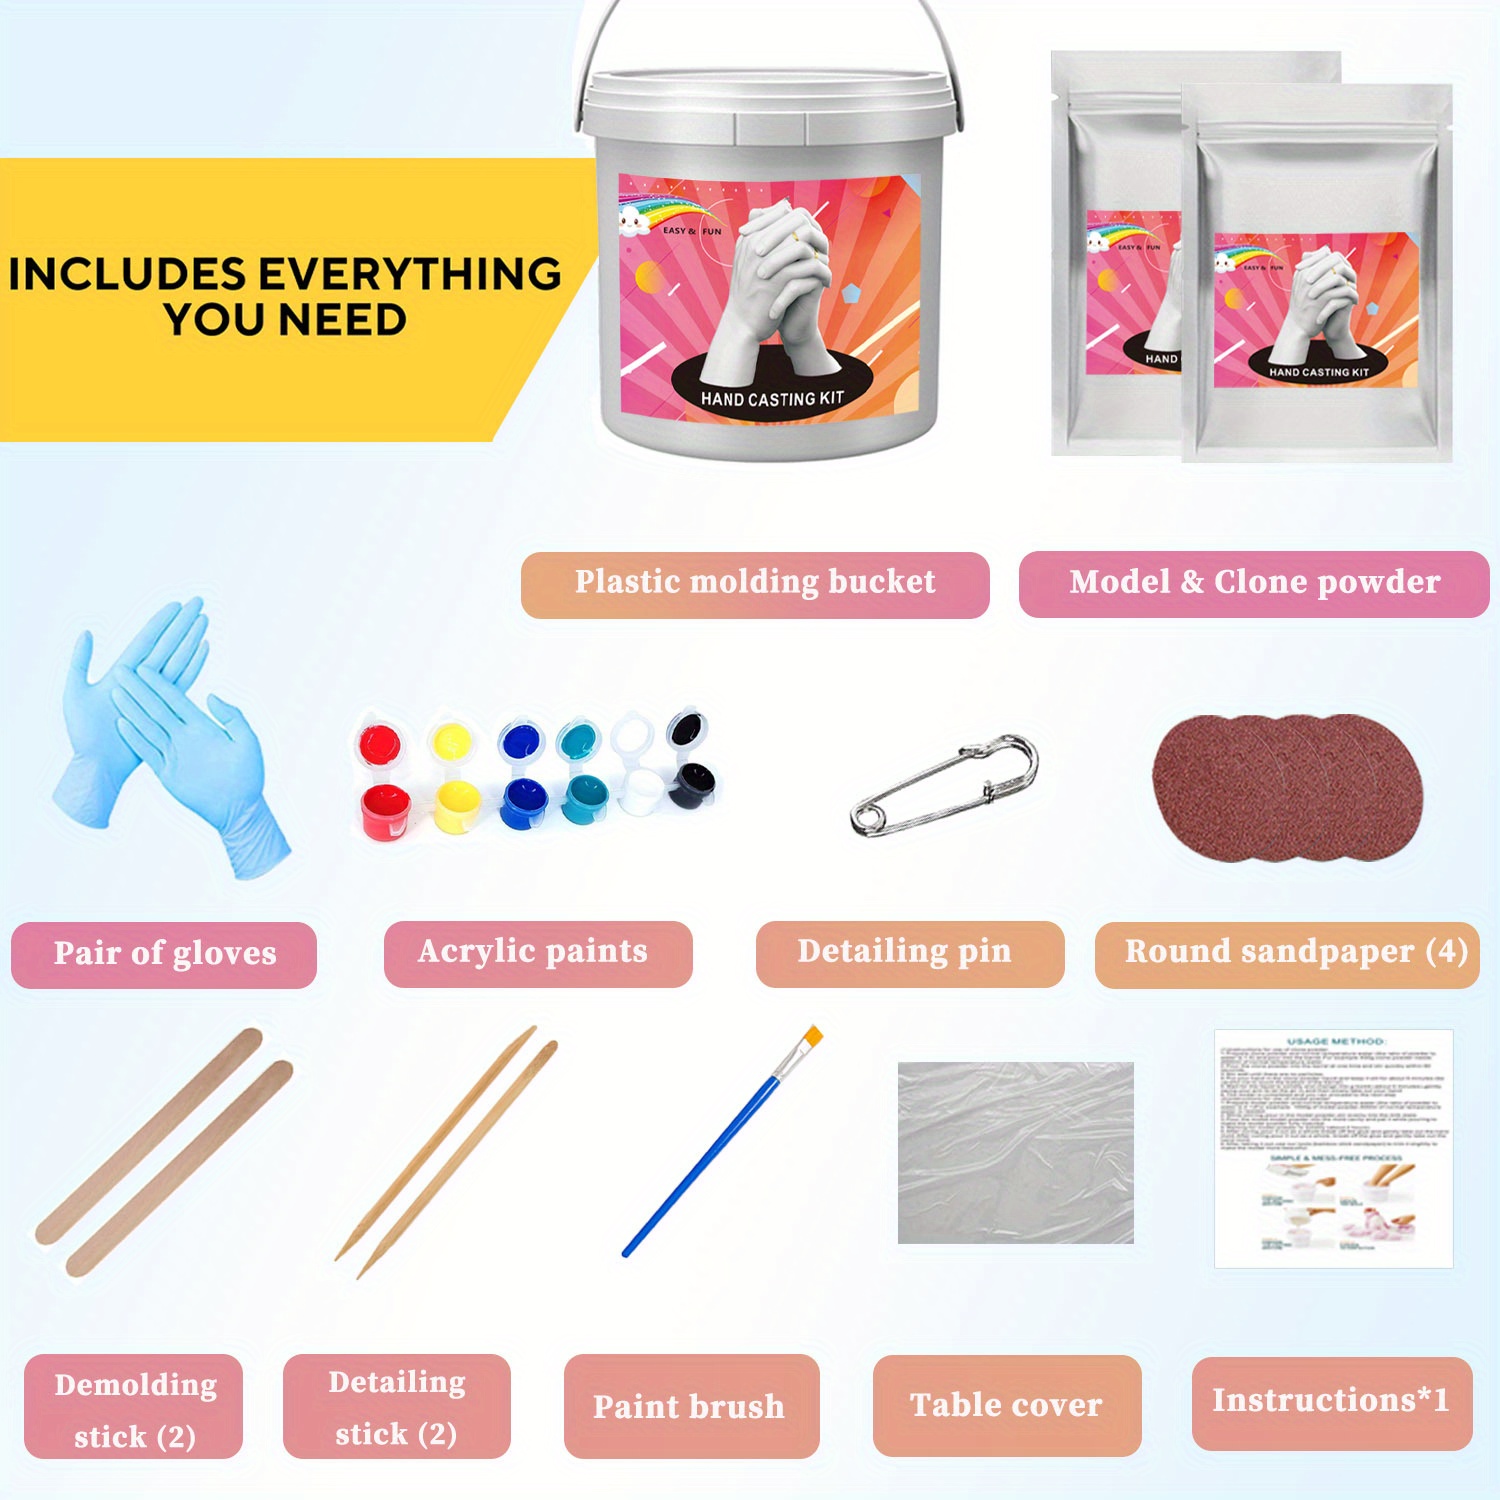 Taqqpue Hand Casting Kit Couples - His and Hers Gifts, DIY Kit, Plaster  Hand Mold Casting Kit,Anniversary Couples Gifts,Valentines Day Gifts for  Women